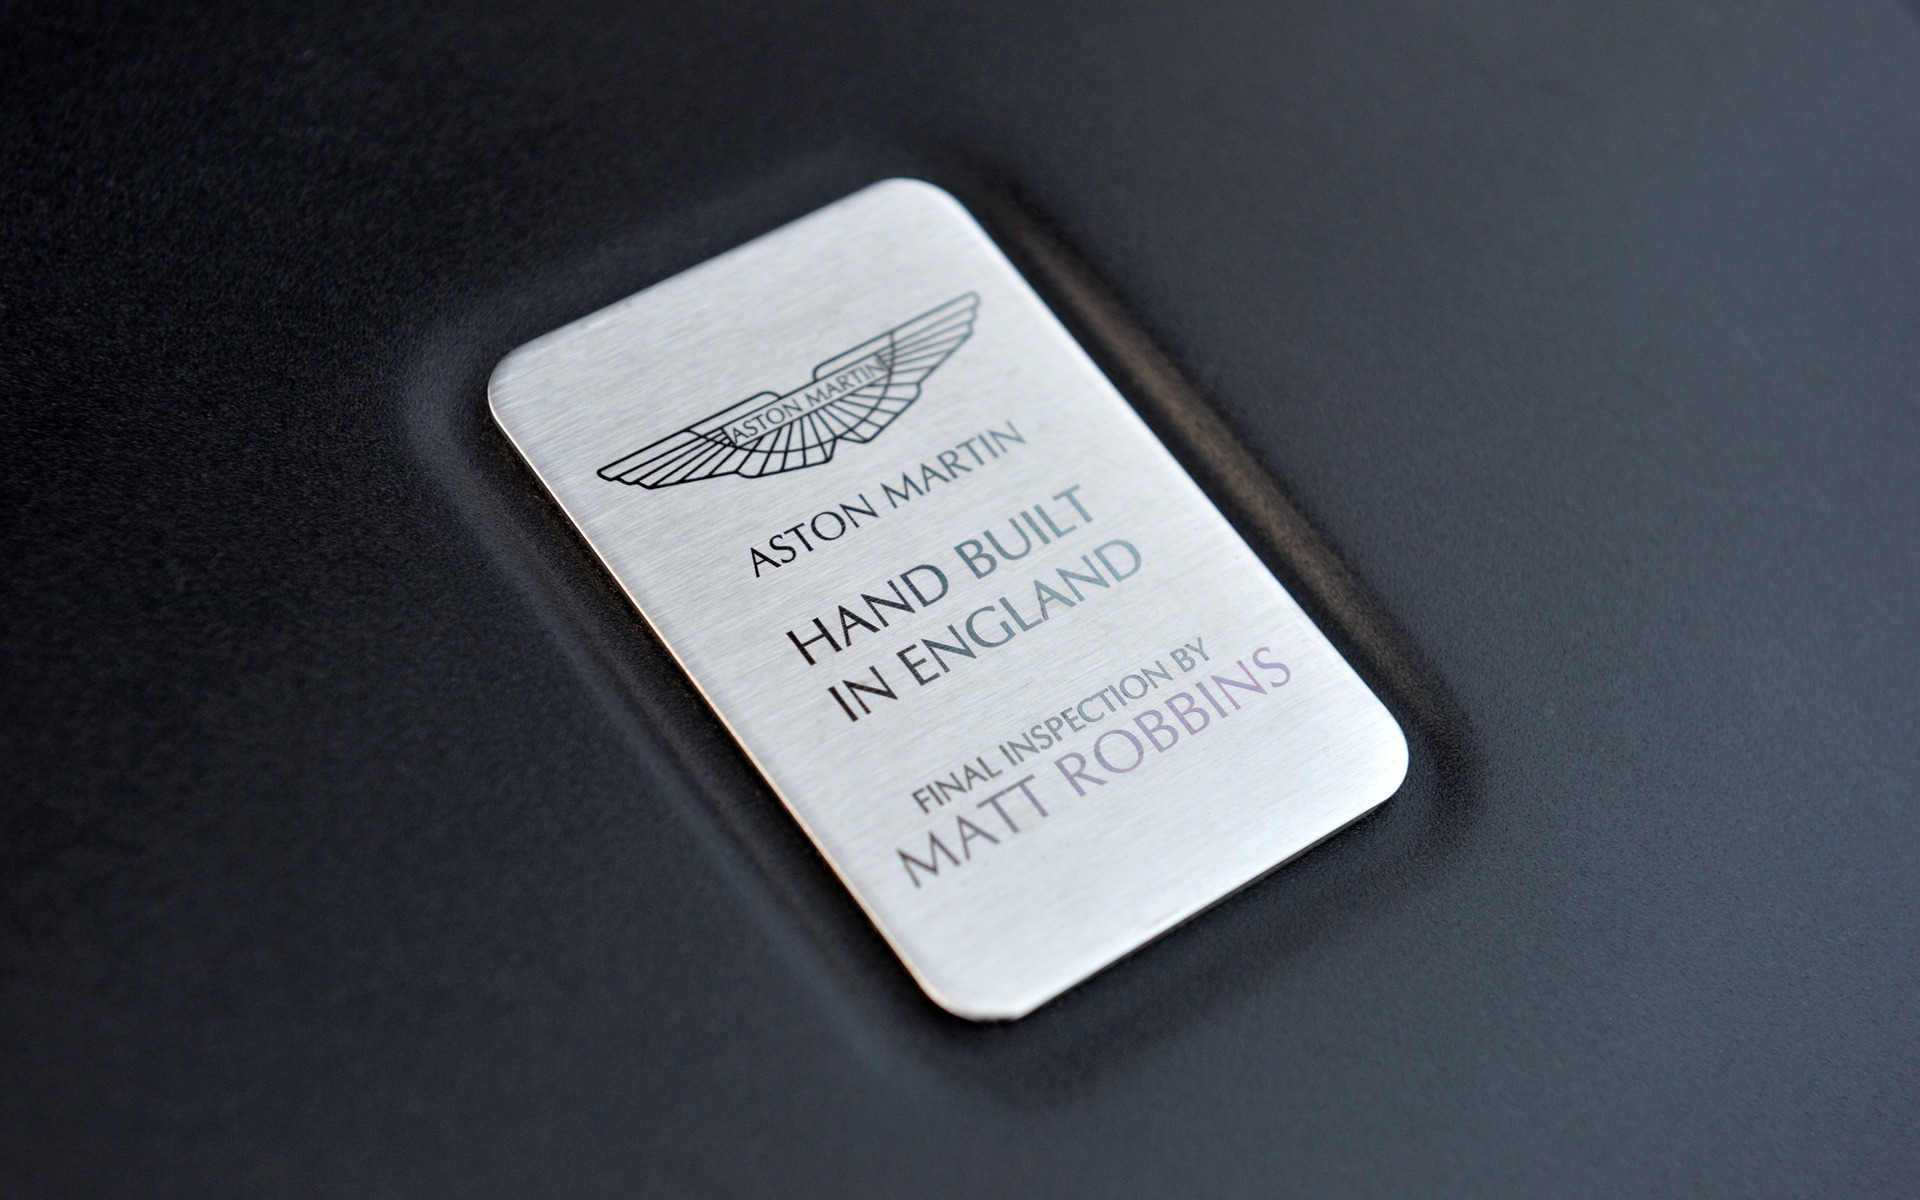 Aston Martin is one of the last automakers to build their cars by hand.